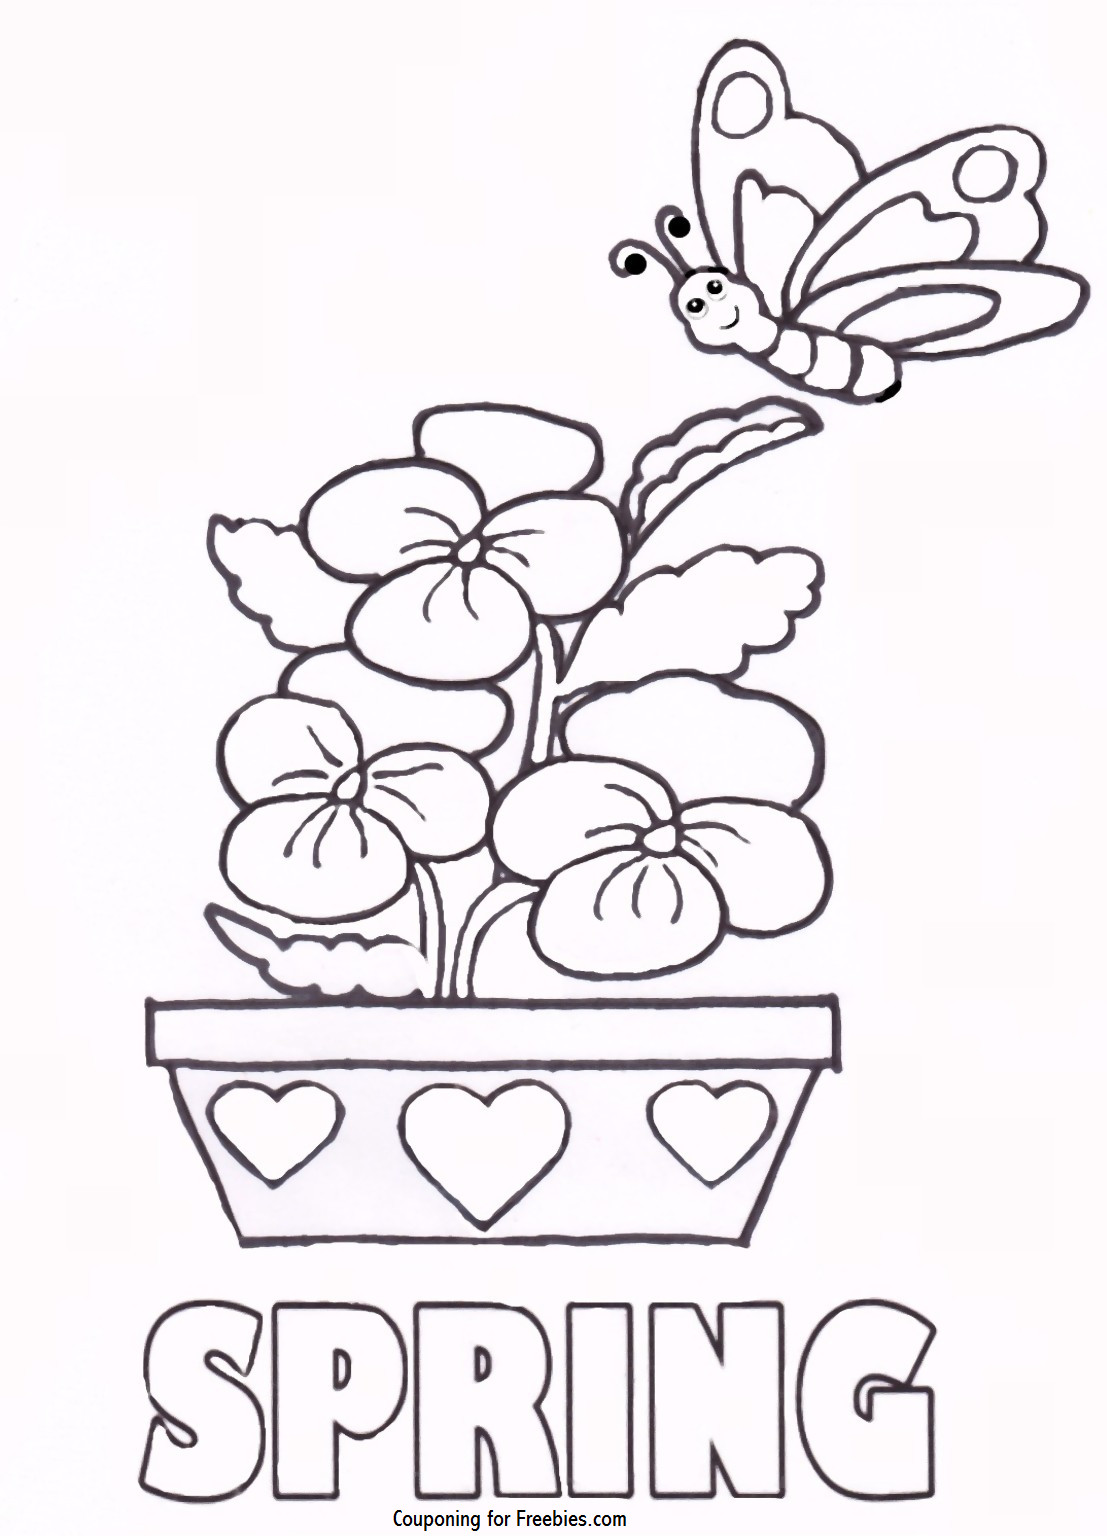 Free Printable Spring Coloring Pages
 FREE Printable Coloring Page With Spring Theme FREE For